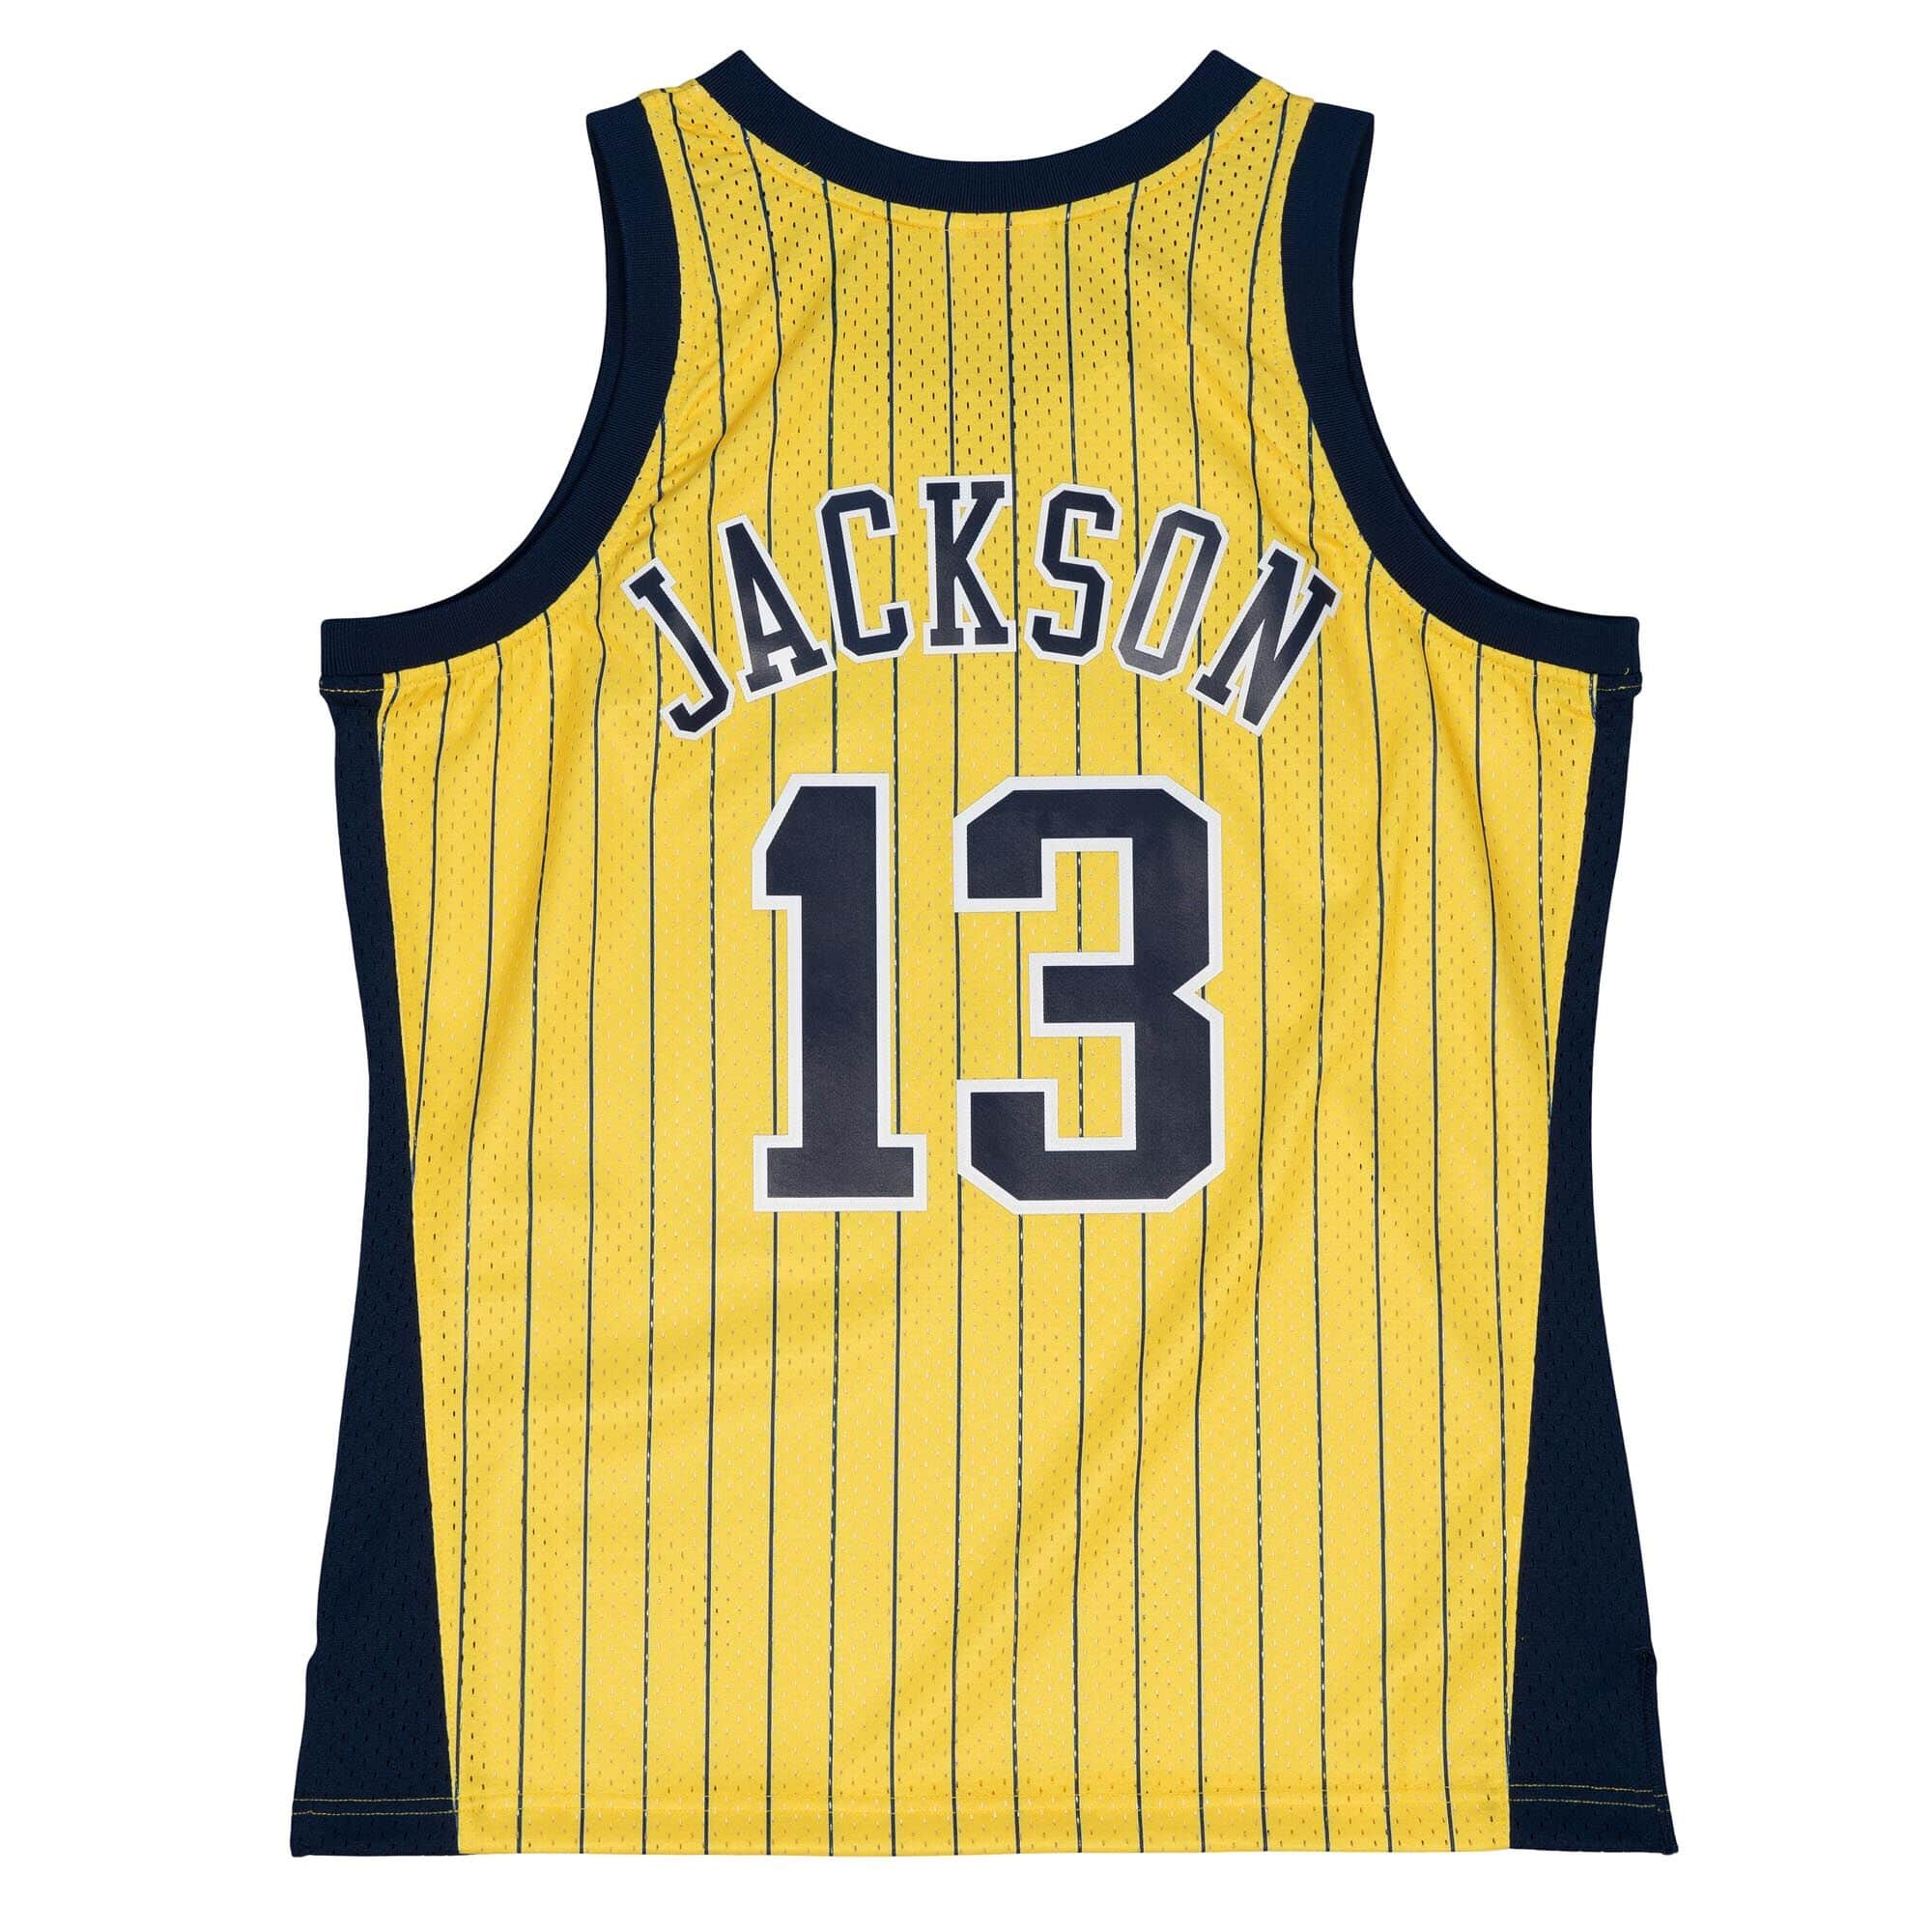 1995-96 Mark Jackson Game Worn Indiana Pacers Jersey - Photo, Lot #50841